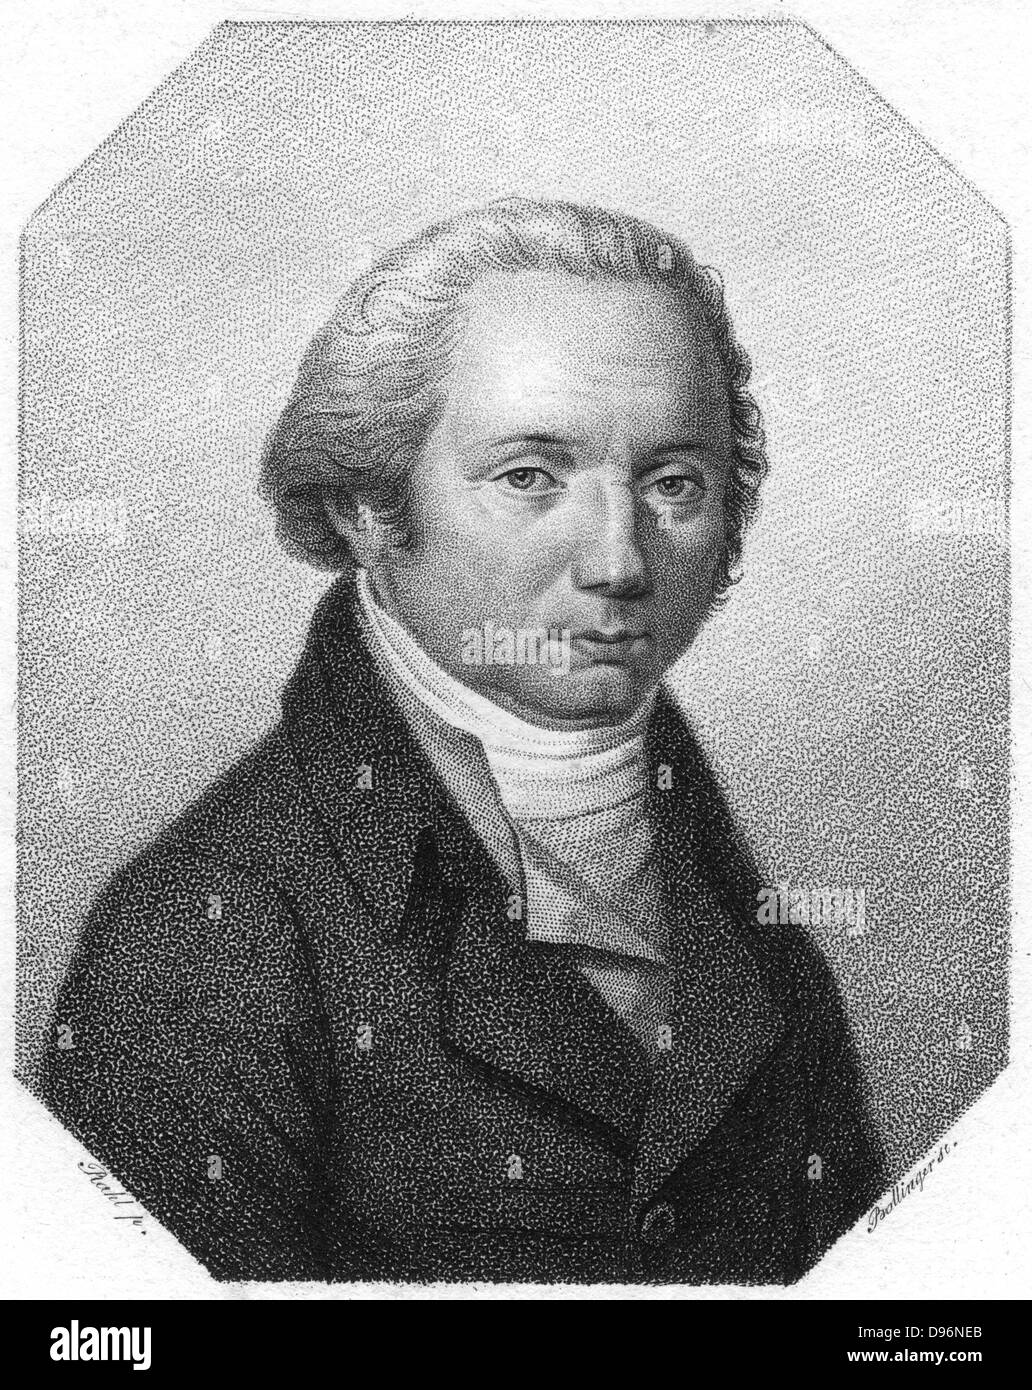 Franz Joseph Gall (1758-1828), German physician and founder of Phrenology, c1790.   The theory that different mental powers are governed by particular regions of the brain which can be recognised by the contours of the cranium had great popularity but was suppressed in 1802 as being a subversive religion.  It enjoyed a second wave of popularity later in the 19th century.  Stipple engraving c1790, Stock Photo